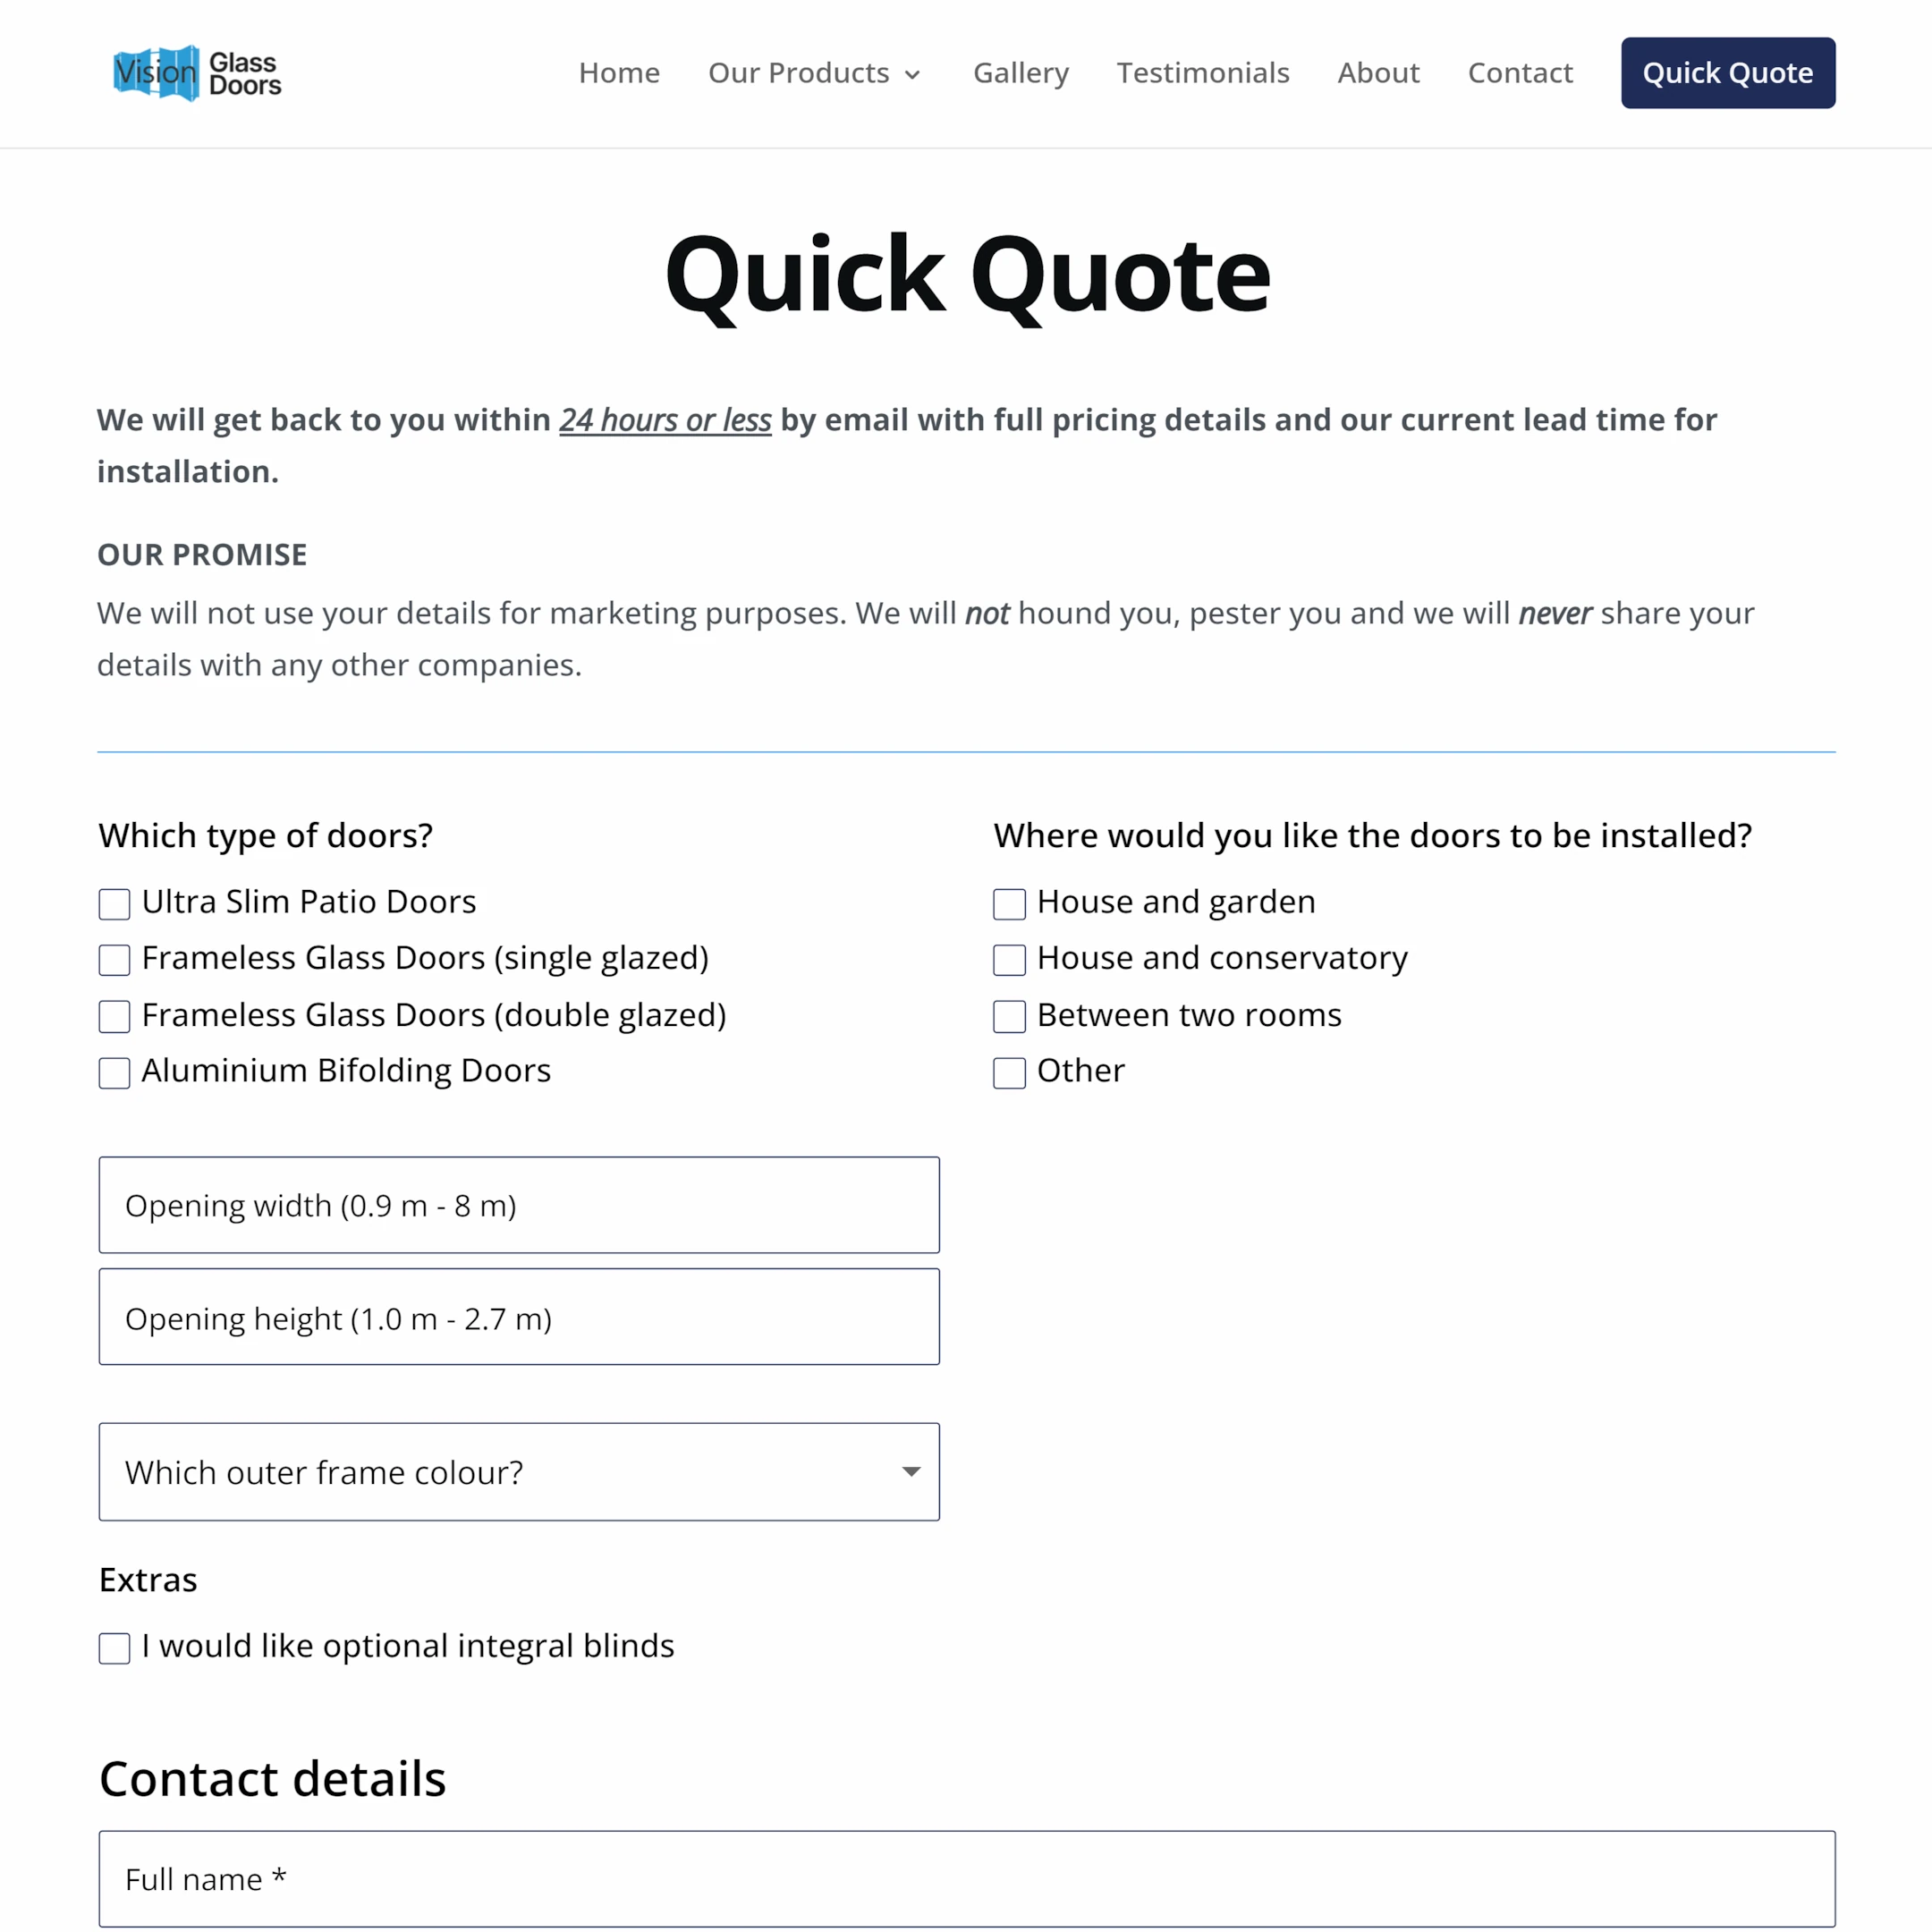 Screenshot of quick quote page of Vision Glass Doors website